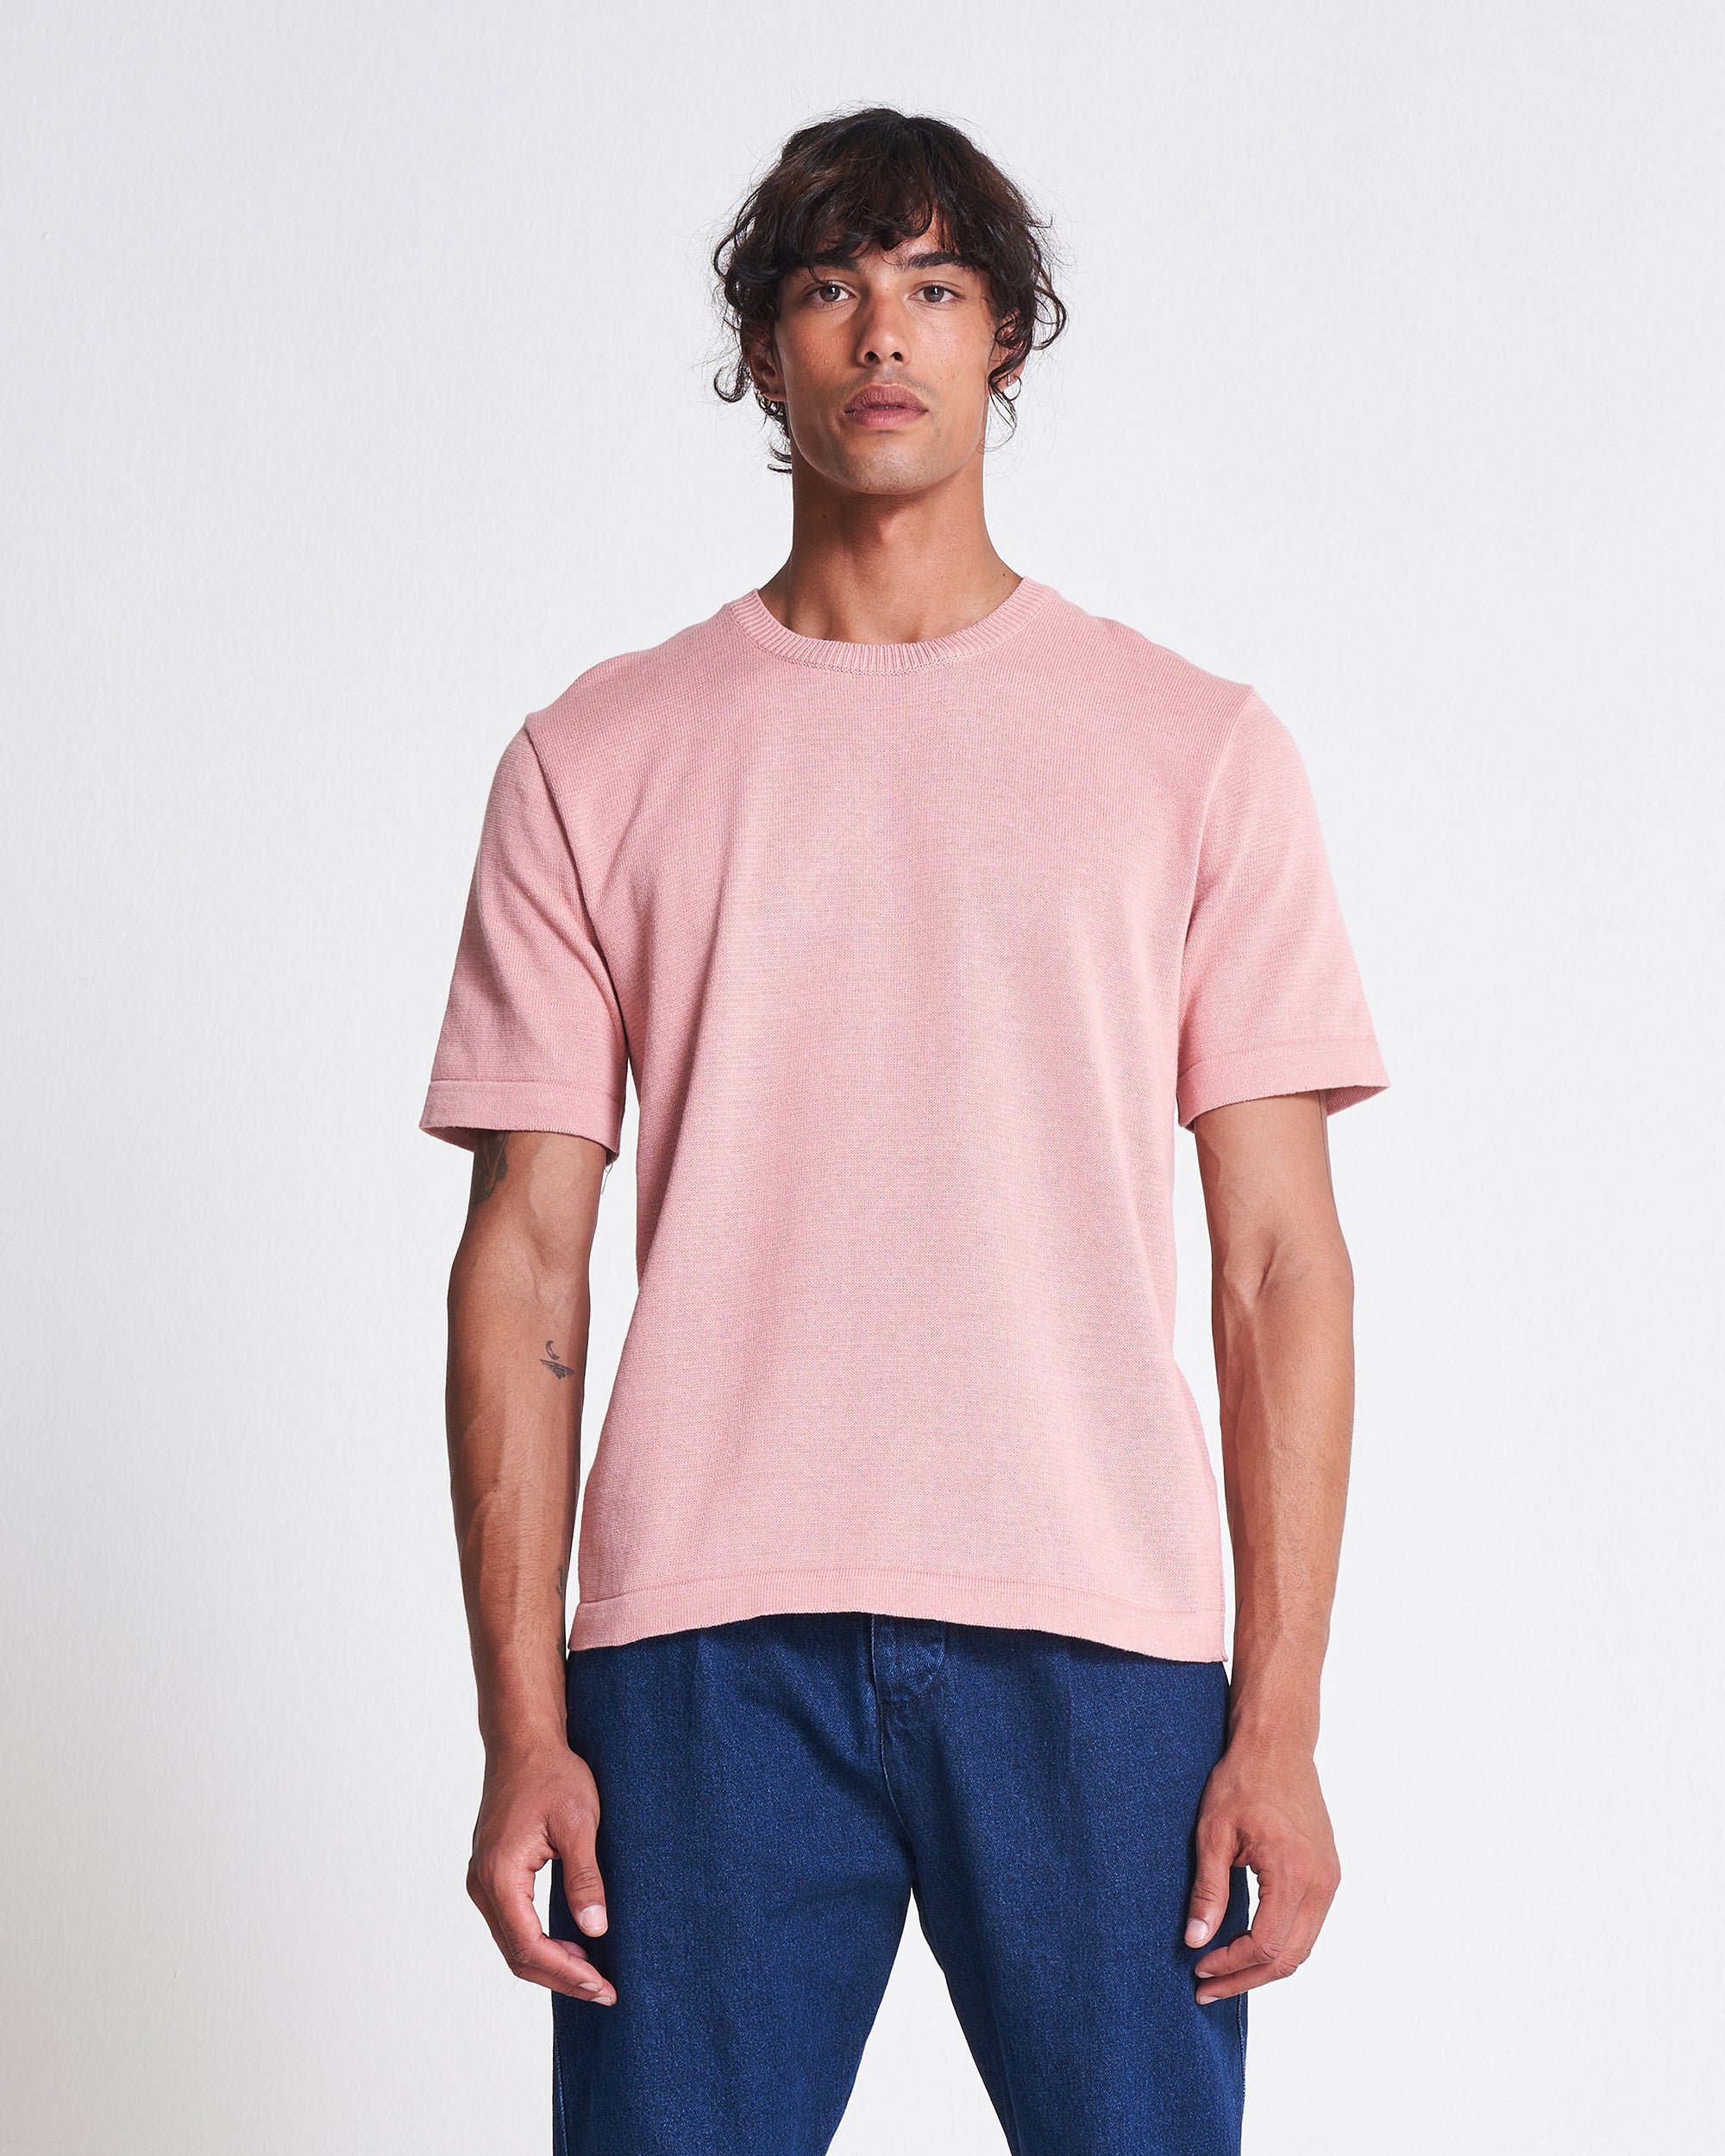 Knitted Tee in Dusty Pink